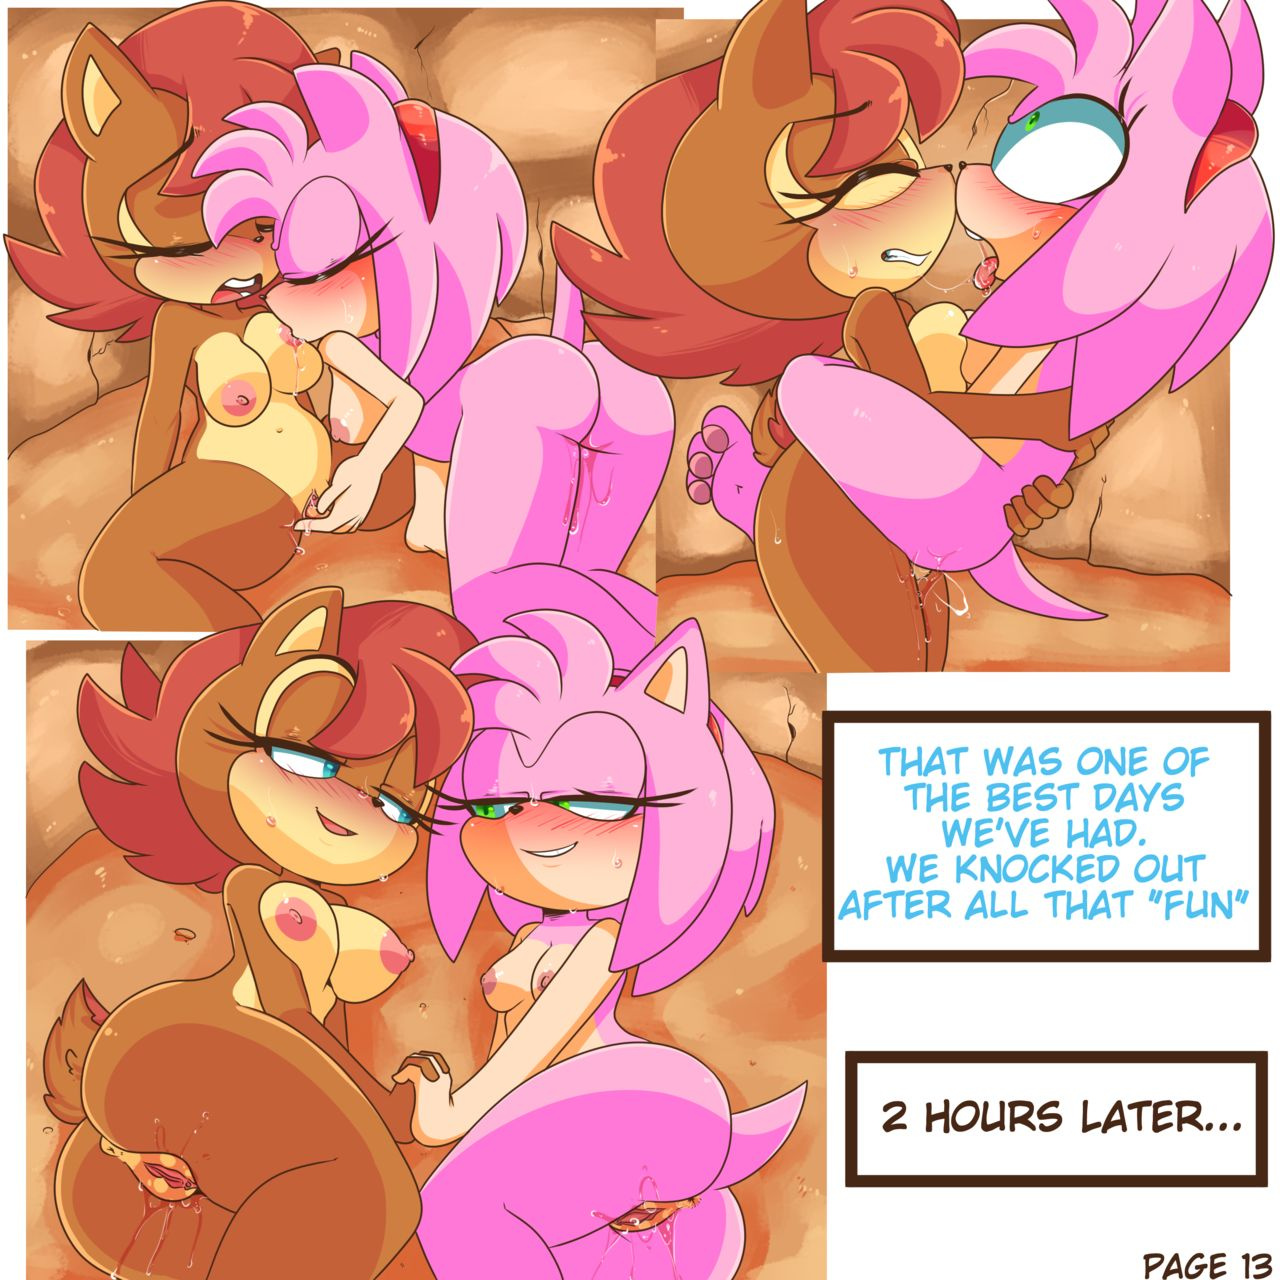 Sally and Amy in The Forbidden Fruit porn comics Oral sex, Anal Sex, cunnilingus, Double Penetration, Furry, Lesbians, Sex Toys